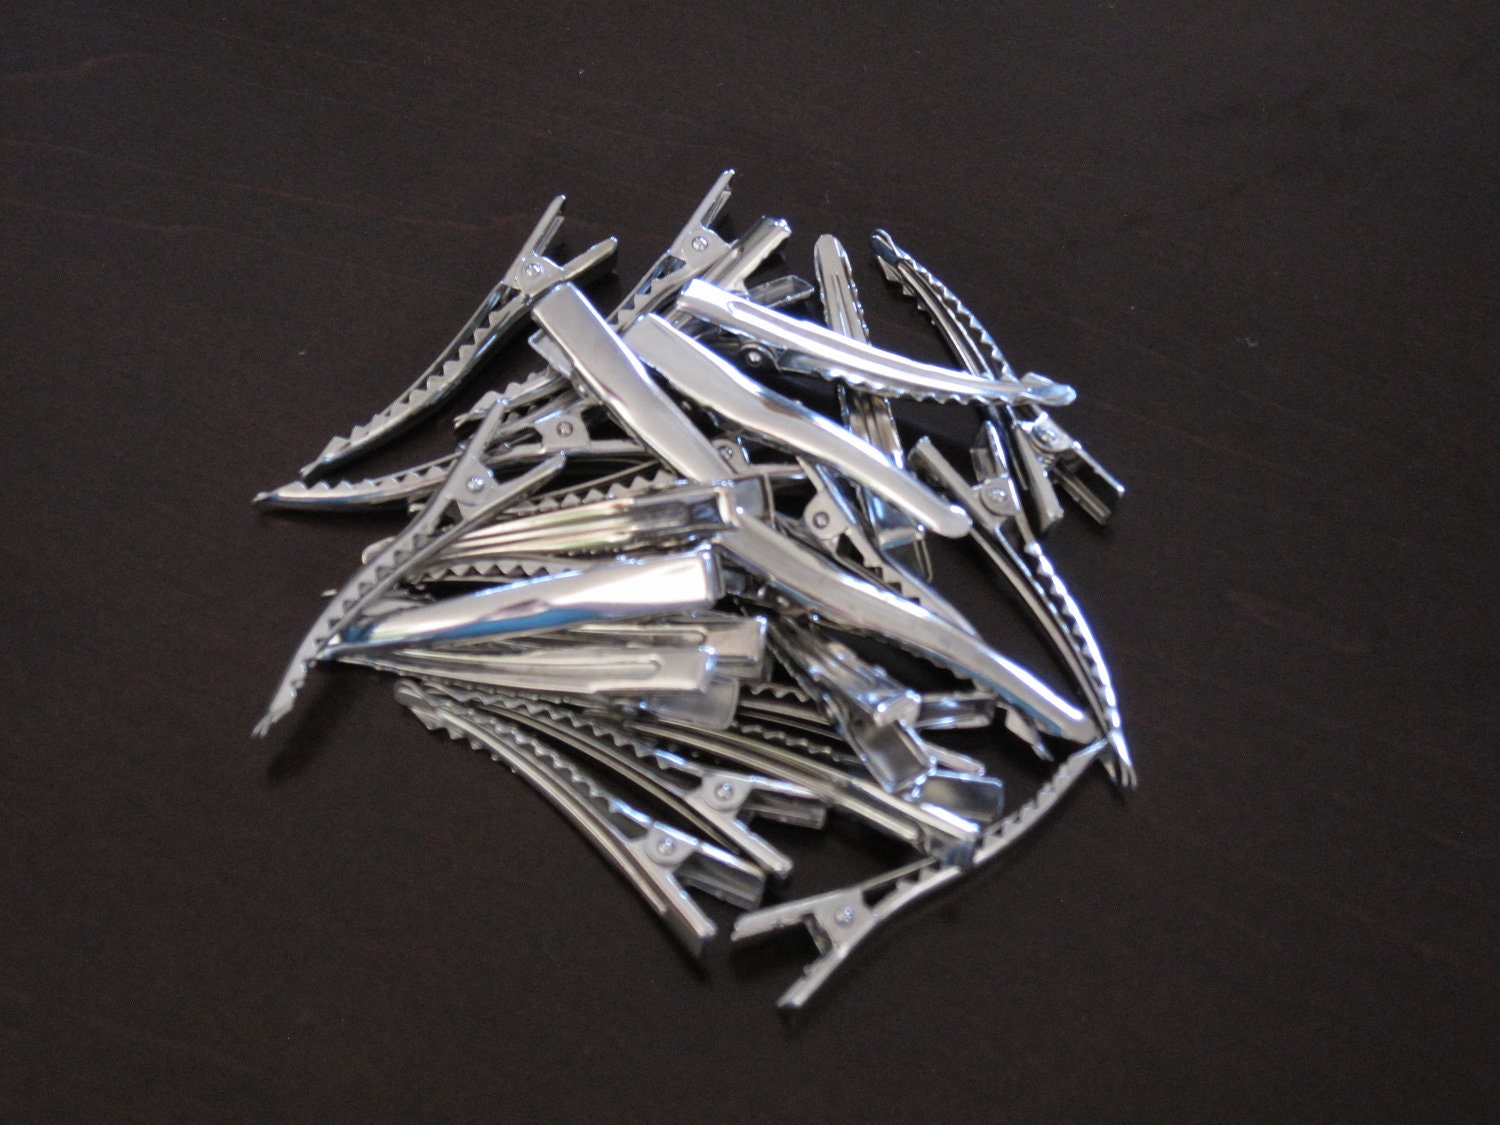 Alligator Clips With Teeth